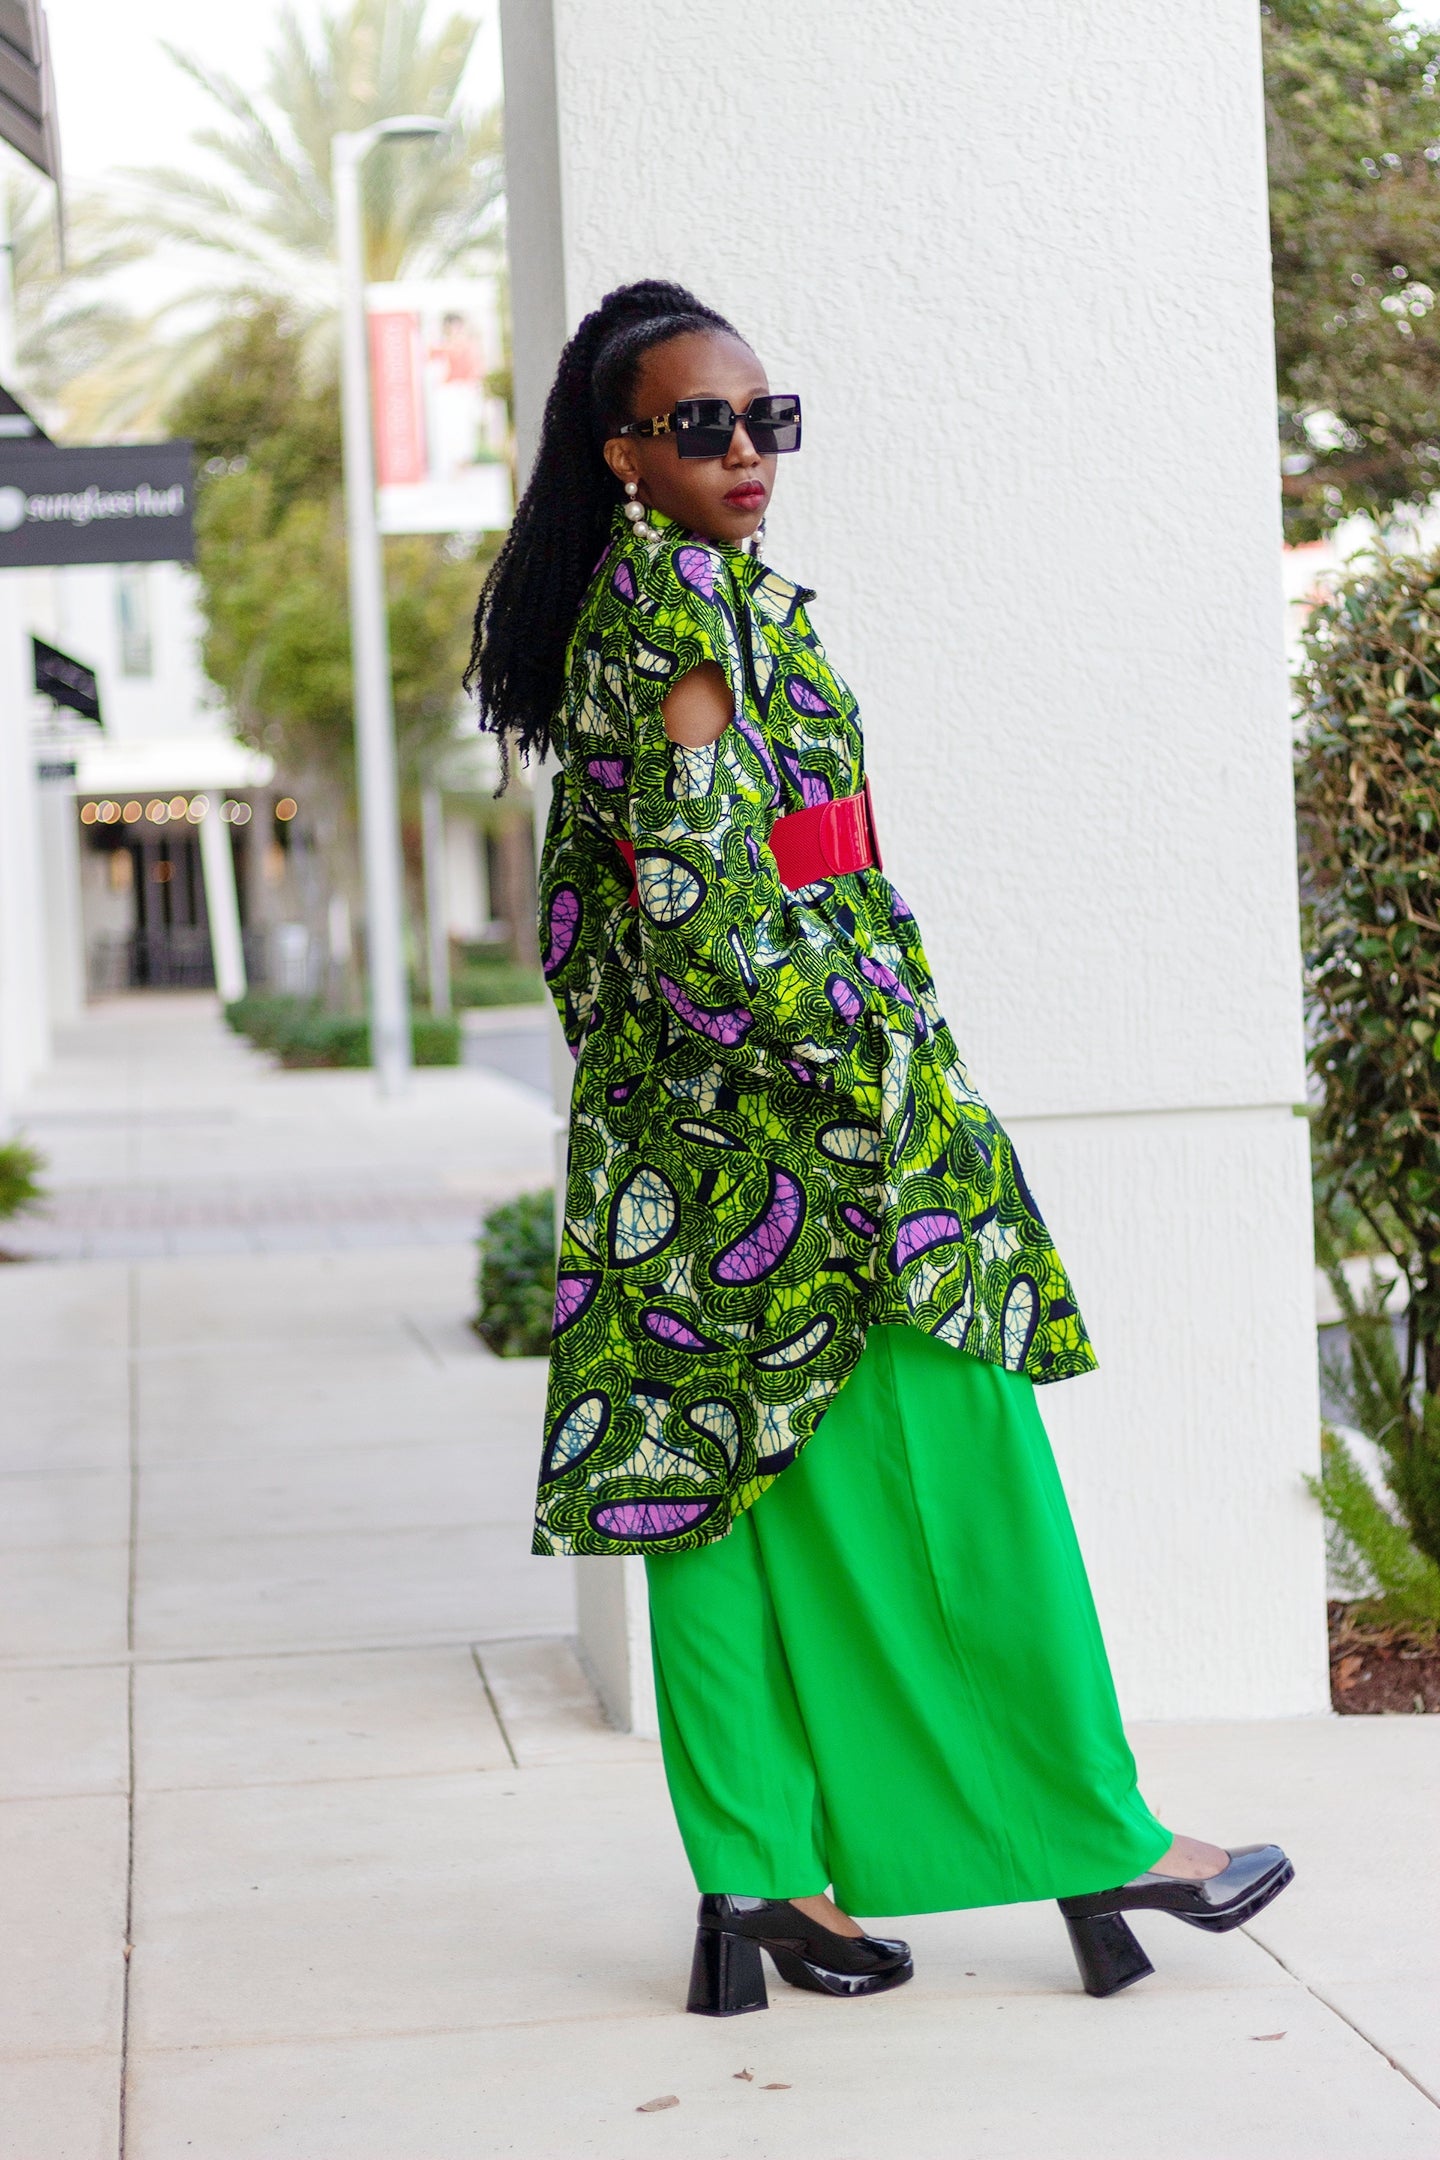 African Print/Ankara/Kitenge High-Low Oversized Shirt with Drop Sleeves and Pockets - Green/Purple/Cream White  and Black motif Print